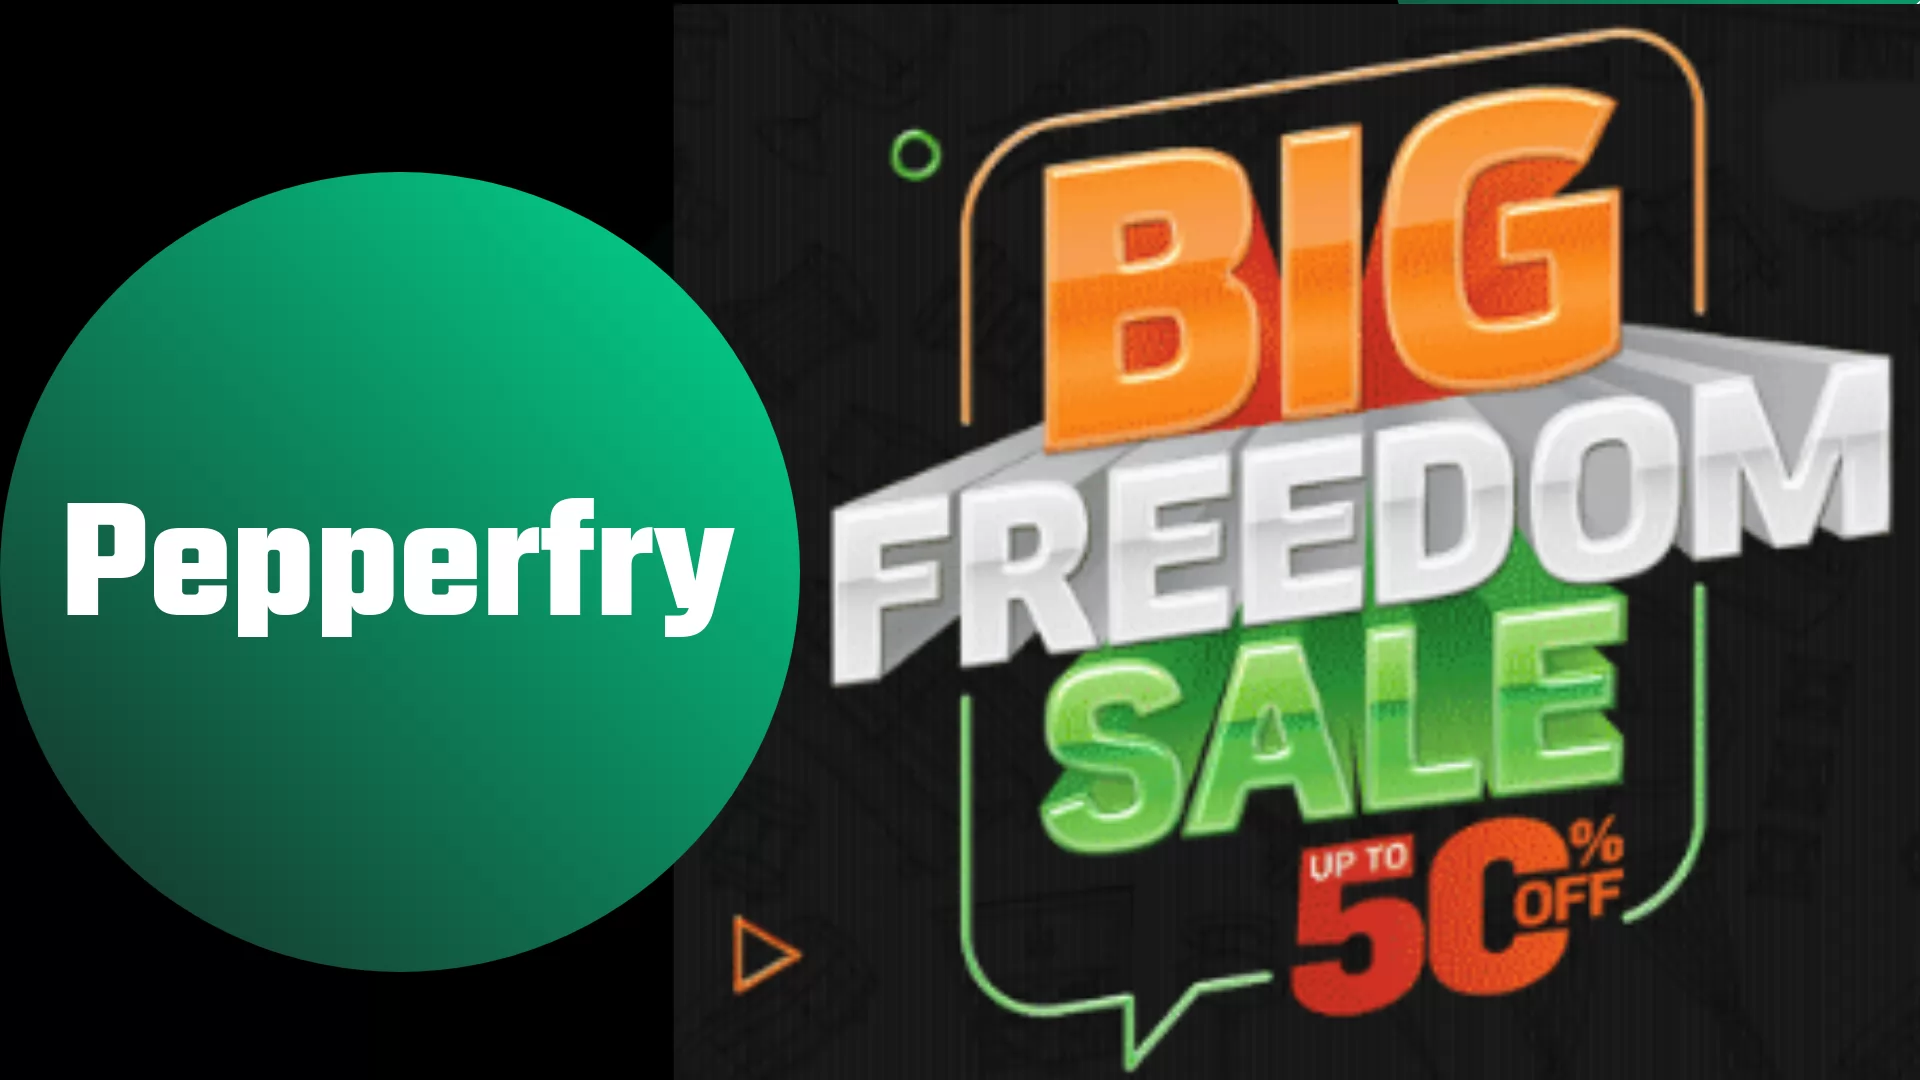 Pepperfry Freedom Sale